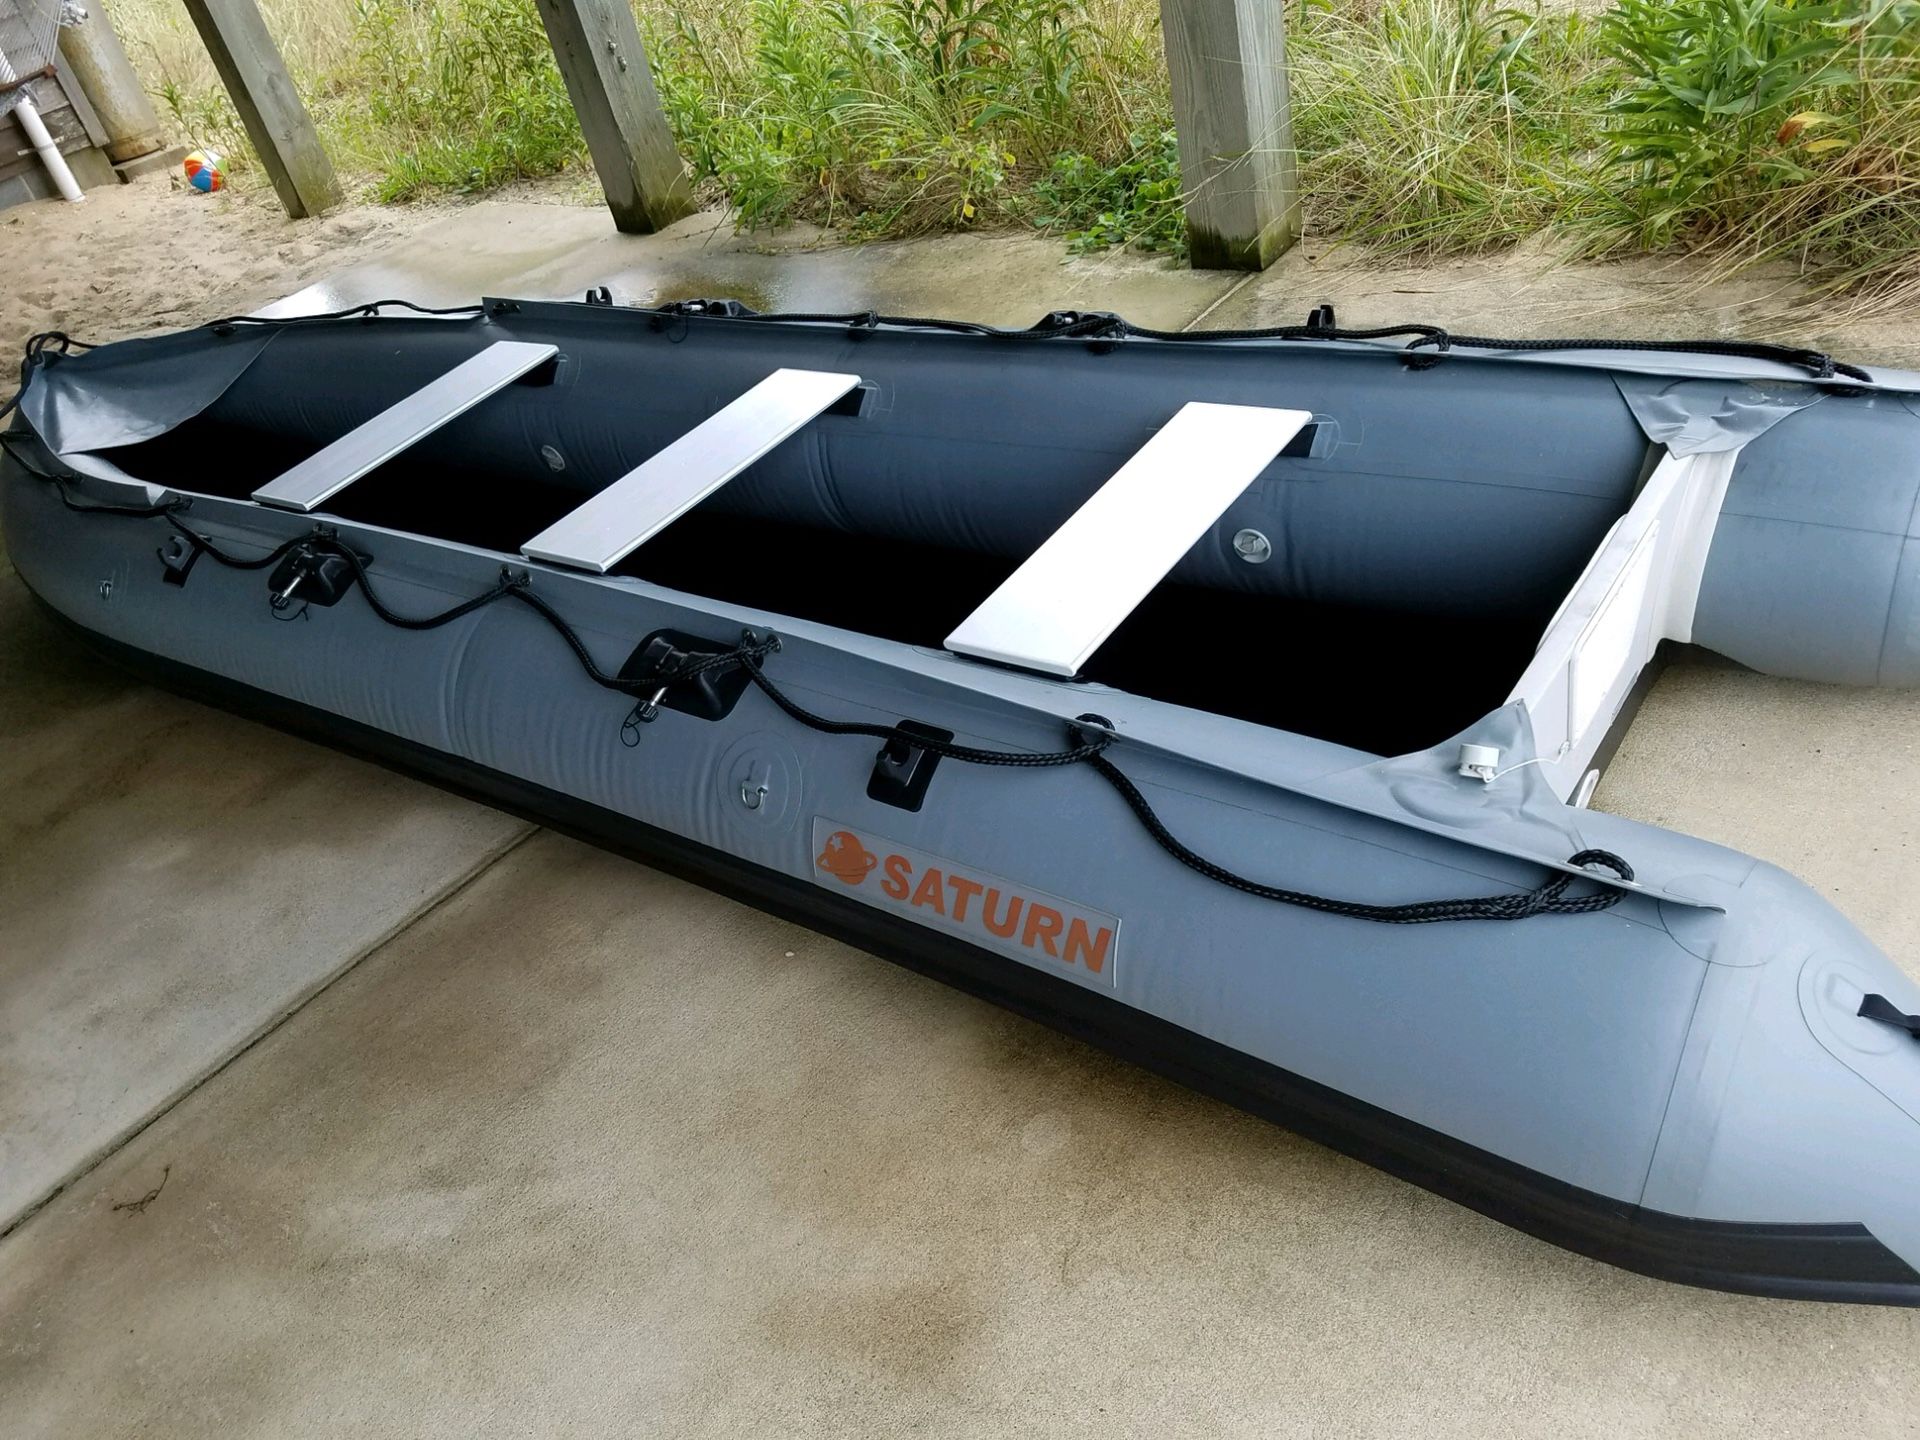 Saturn inflatable boat